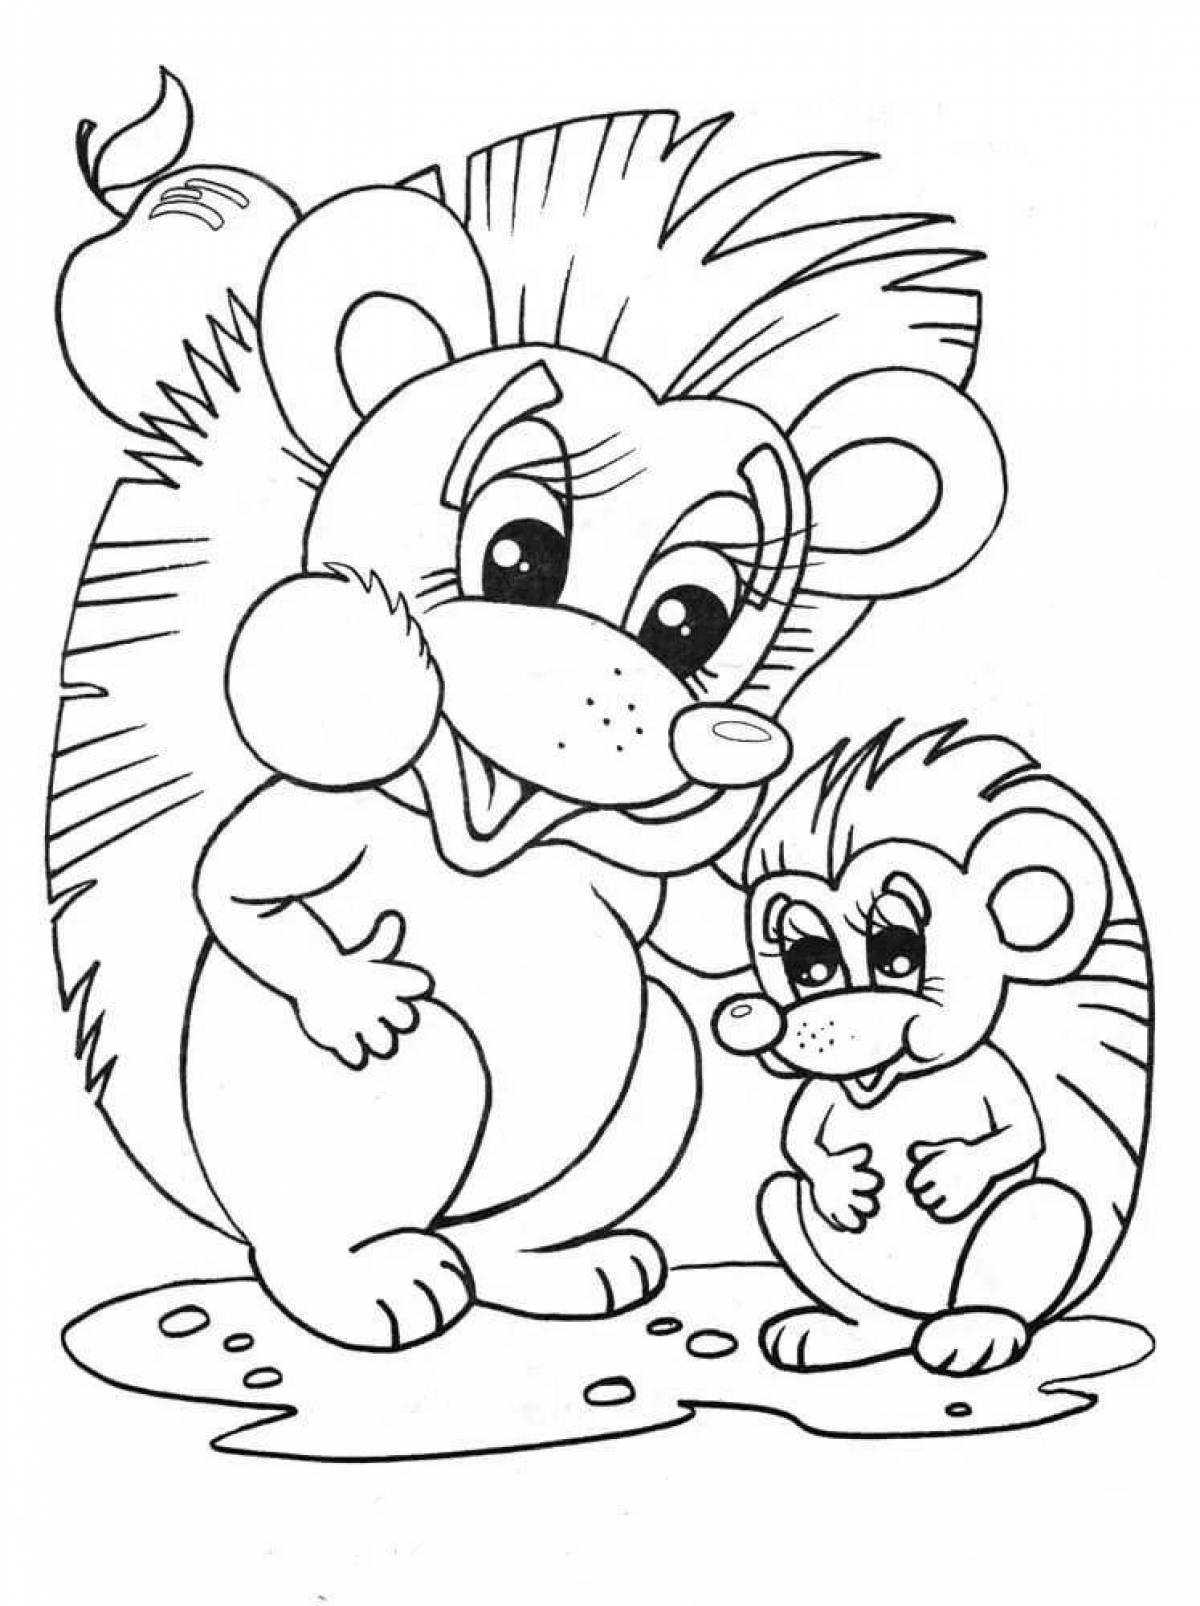 Furry animal coloring pages